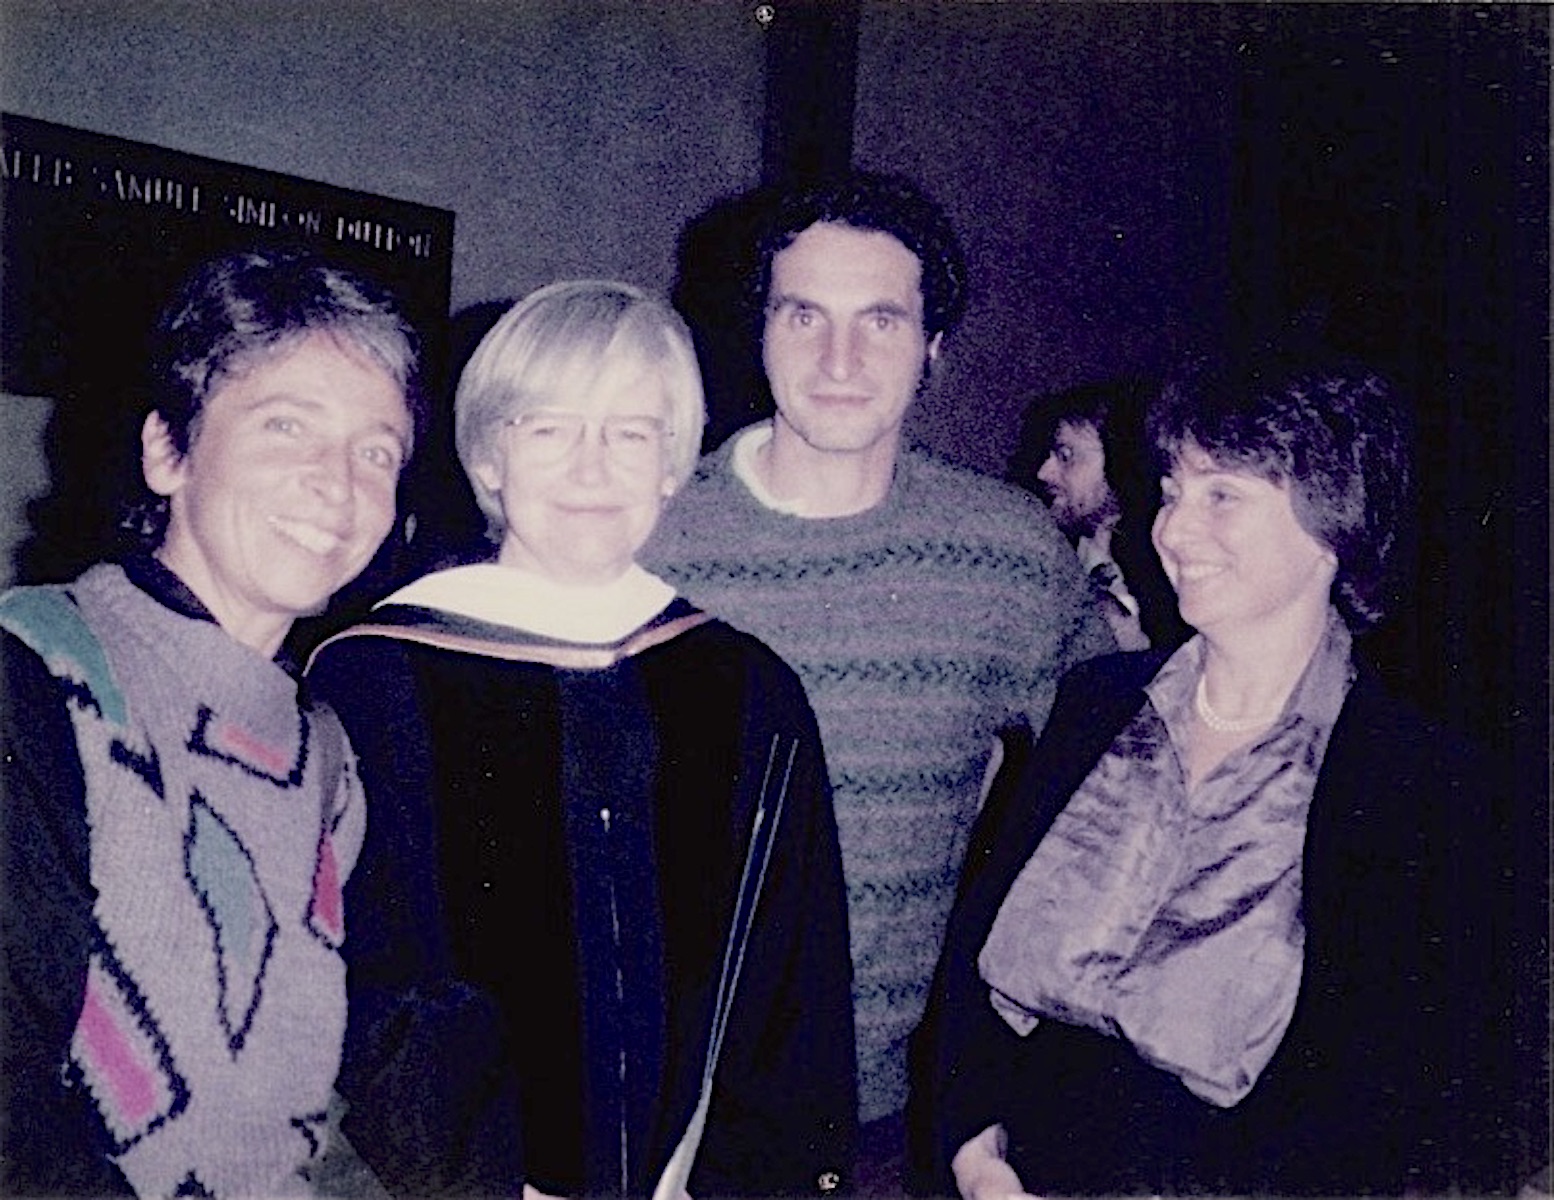 Susan in her doctoral gown, holding her honorary doctorate certificate from the Graduate Theological Union, 1985. Photo courtesy of Susan Griffin.